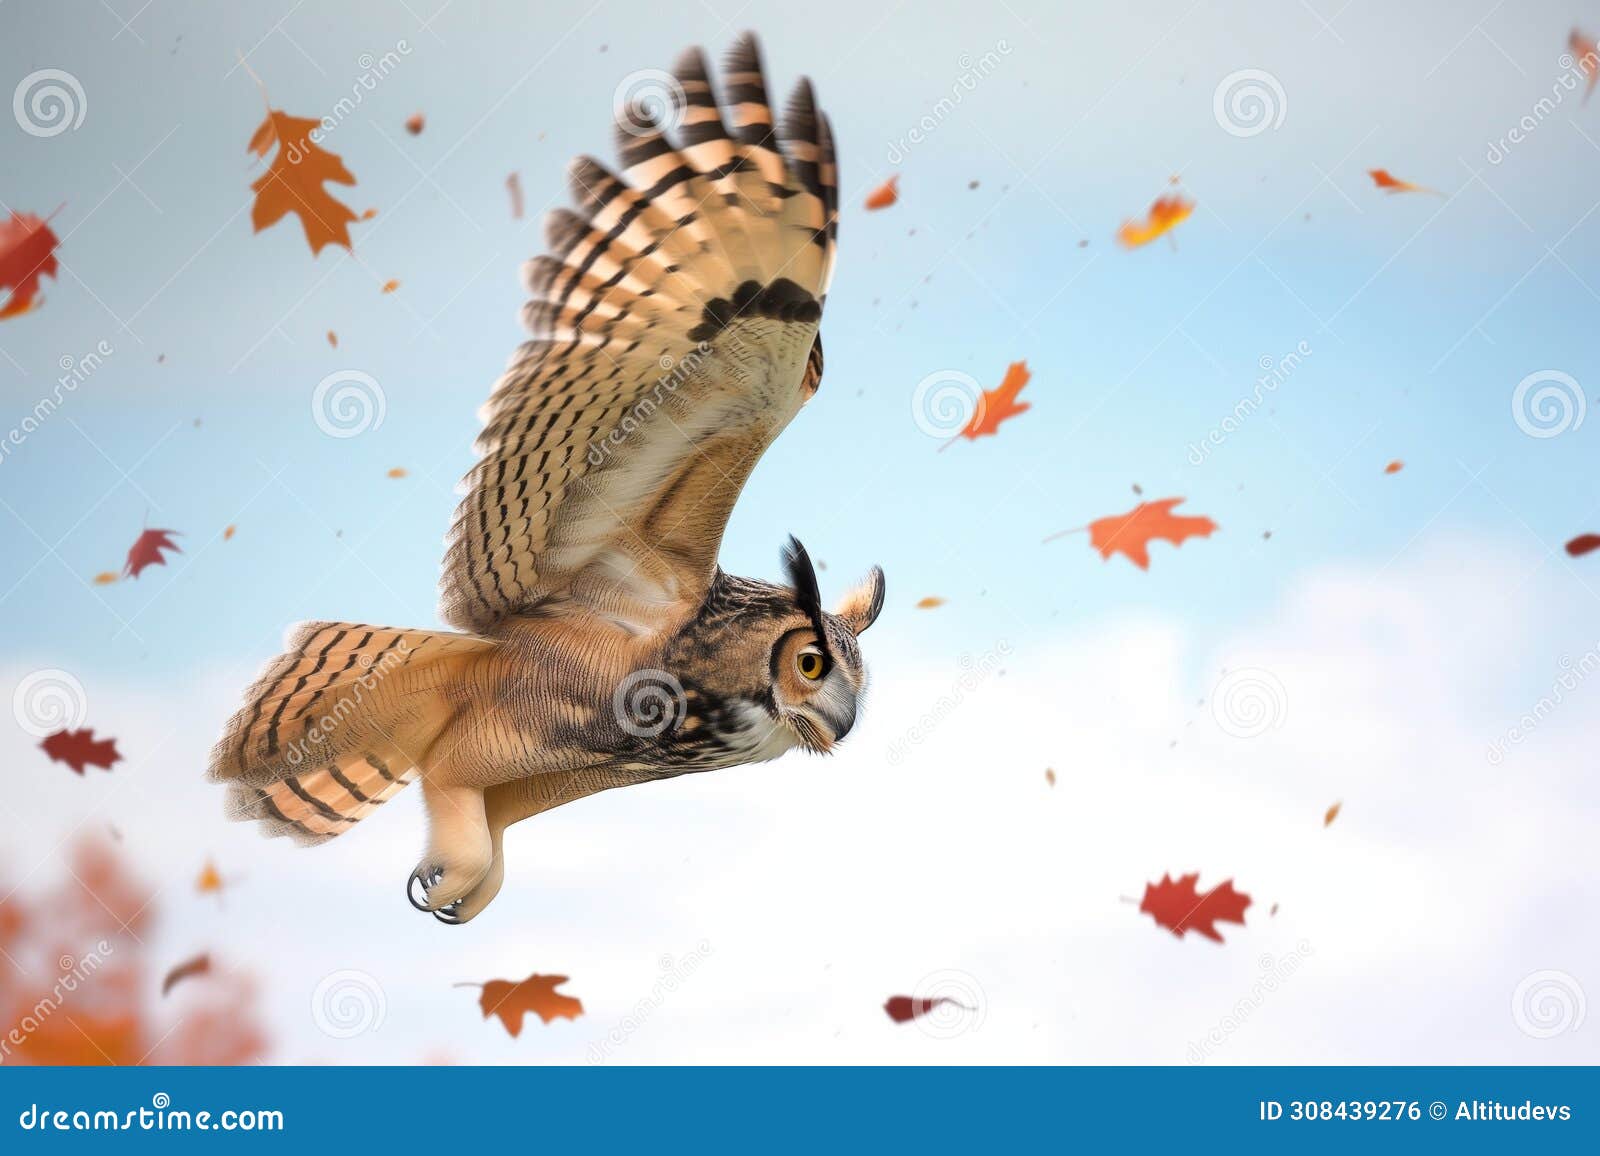 midflight owl with autumn leaves falling around it, facing the viewer